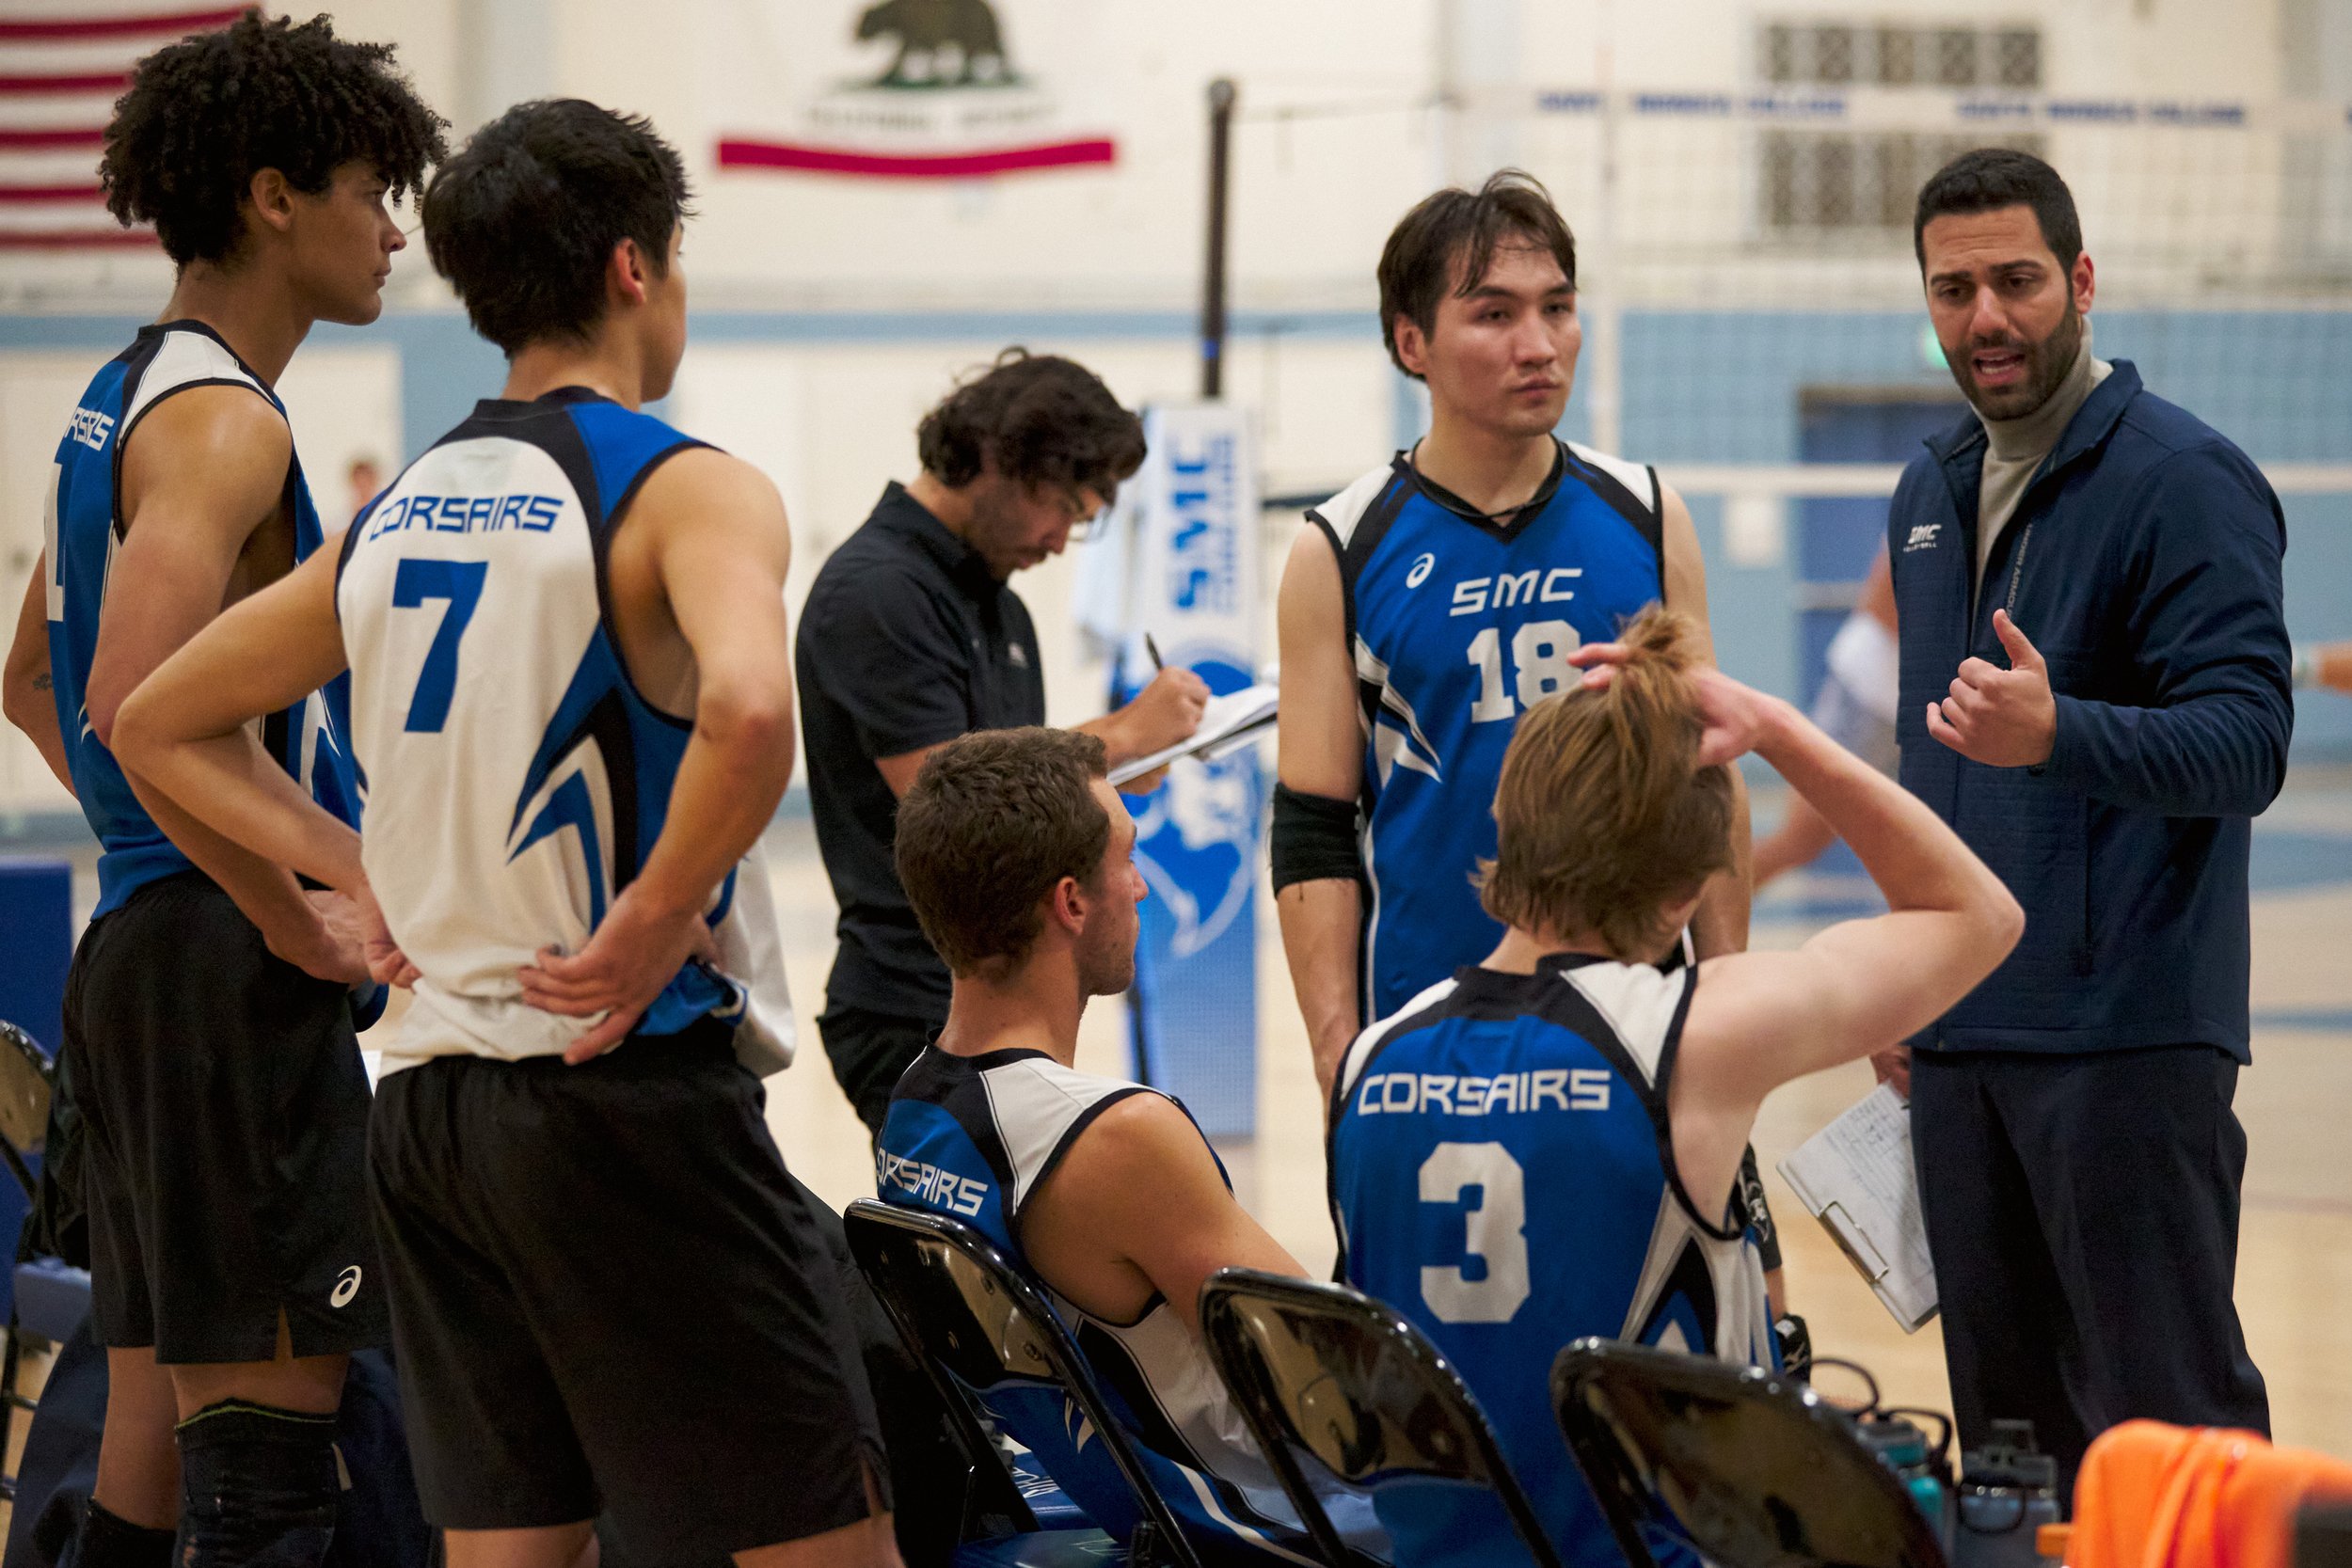  Santa Monica College Corsairs Men's Volleyball Head Coach Liran Zamir talks to the team between sets during the match against the Irvine Valley College Lasers on Friday, Feb. 24, 2023, at Corsair Gym in Santa Monica, Calif. The Corsairs Lost 3-1. (N